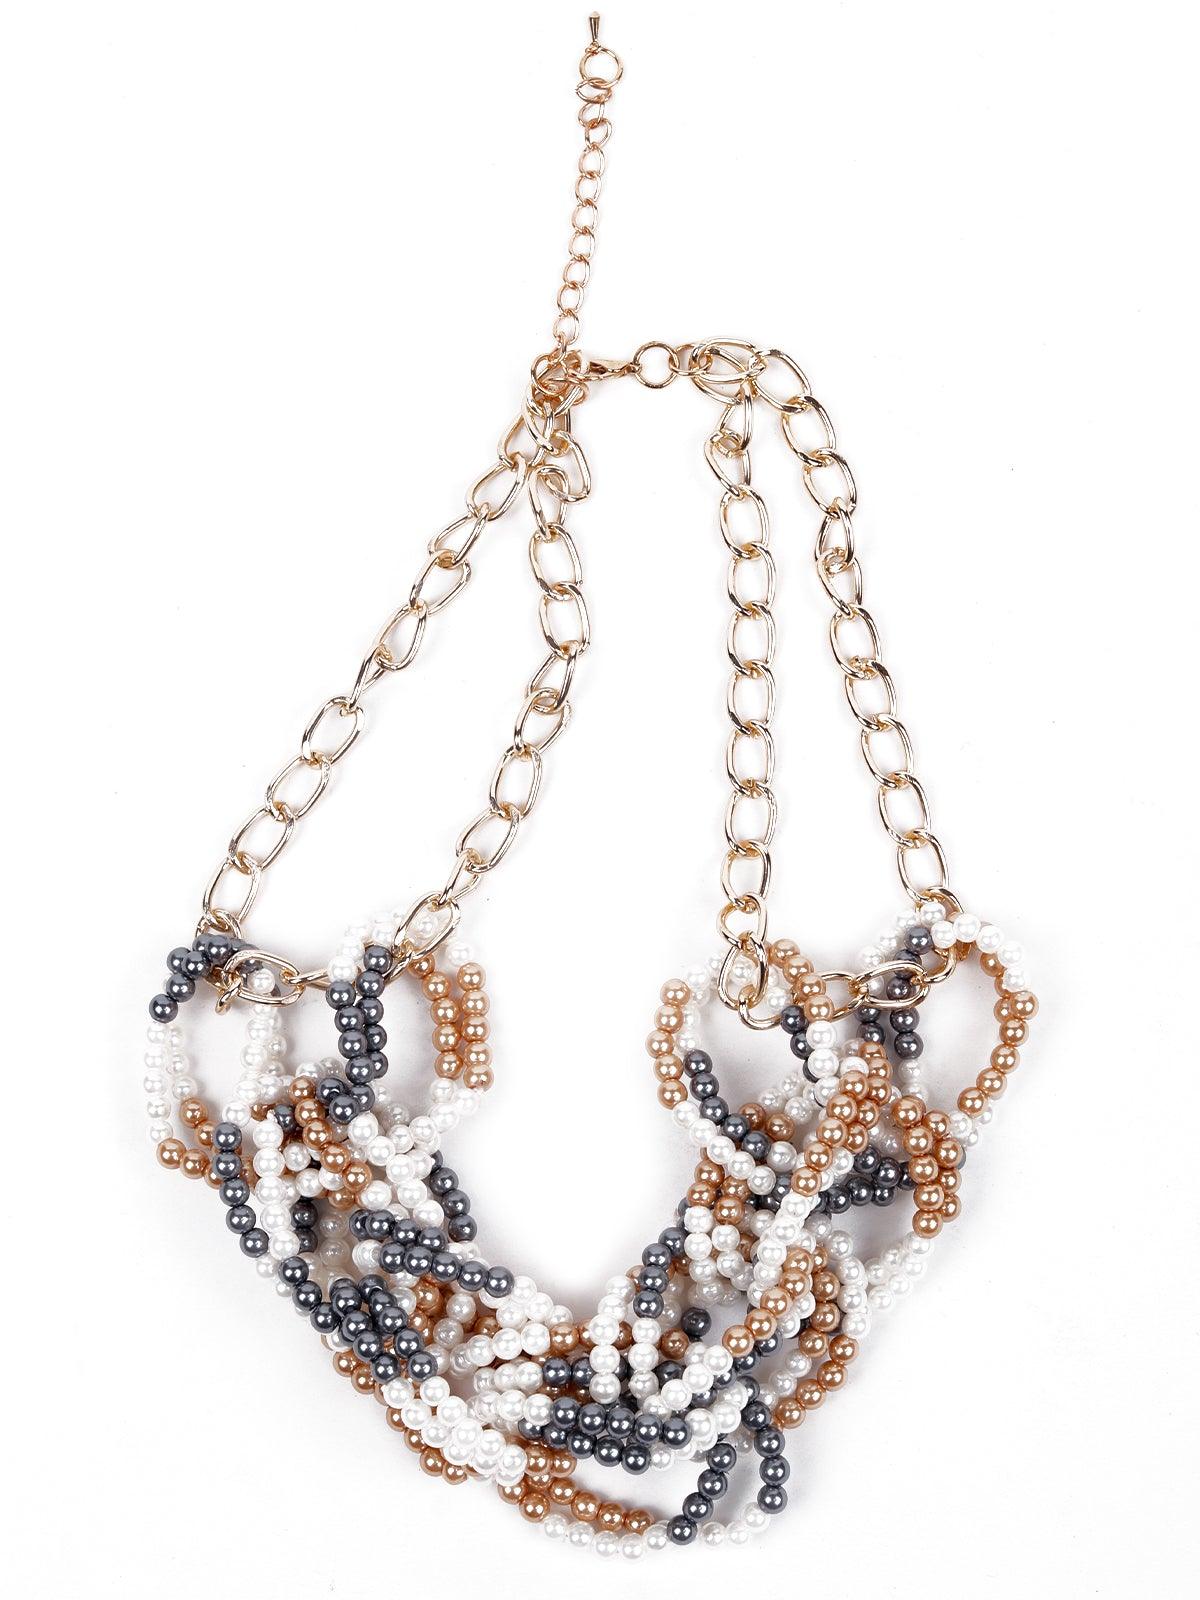 Rose Gold,Black And White Interlinked Beaded Statement Necklace. - Odette